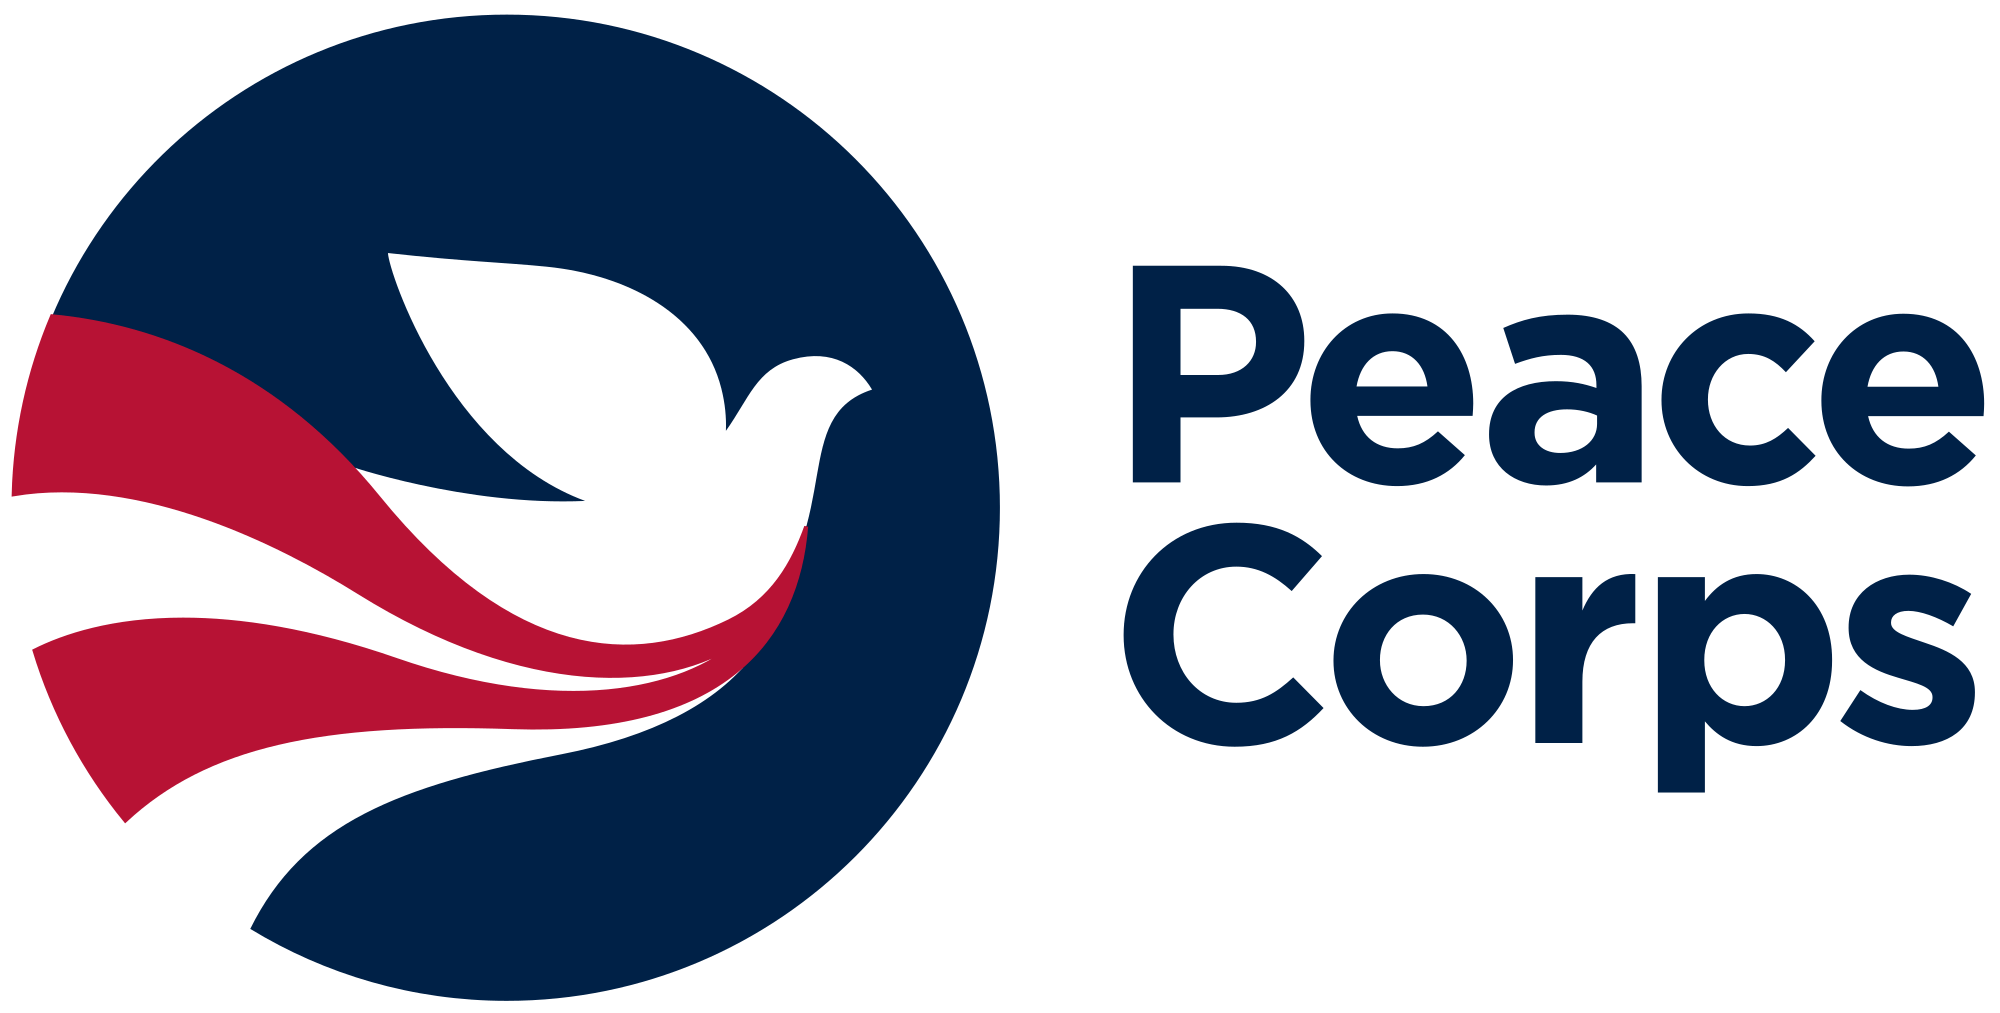 The Corps Logo - File:Peace corps logo16.svg - Wikimedia Commons